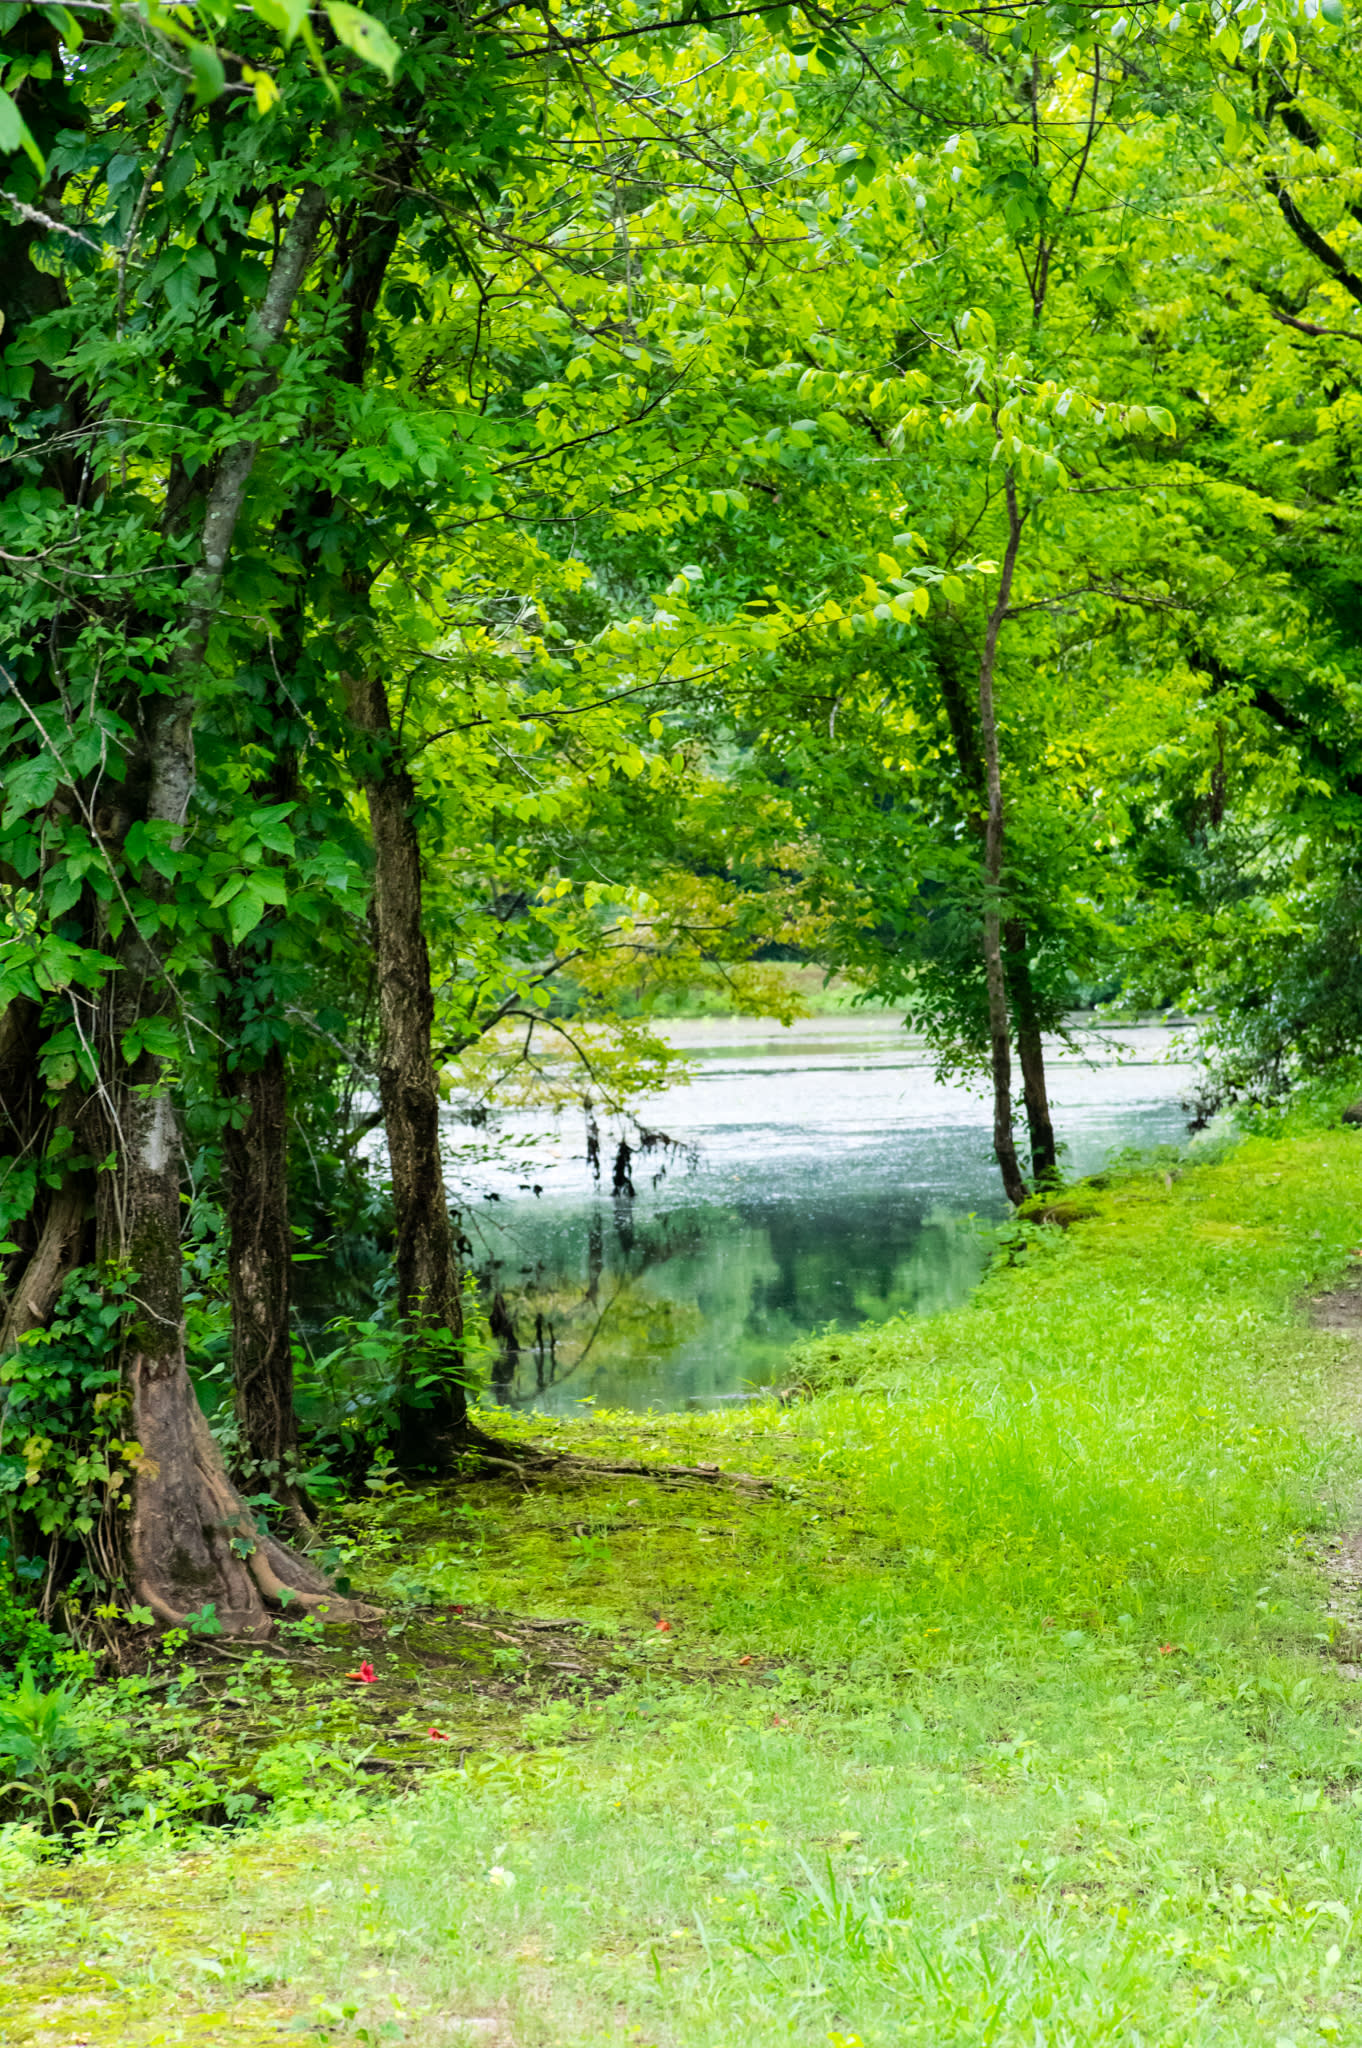 3 Huntsville Outdoor Favorites For Every Type of Nature Lover via iHeartHsv.com